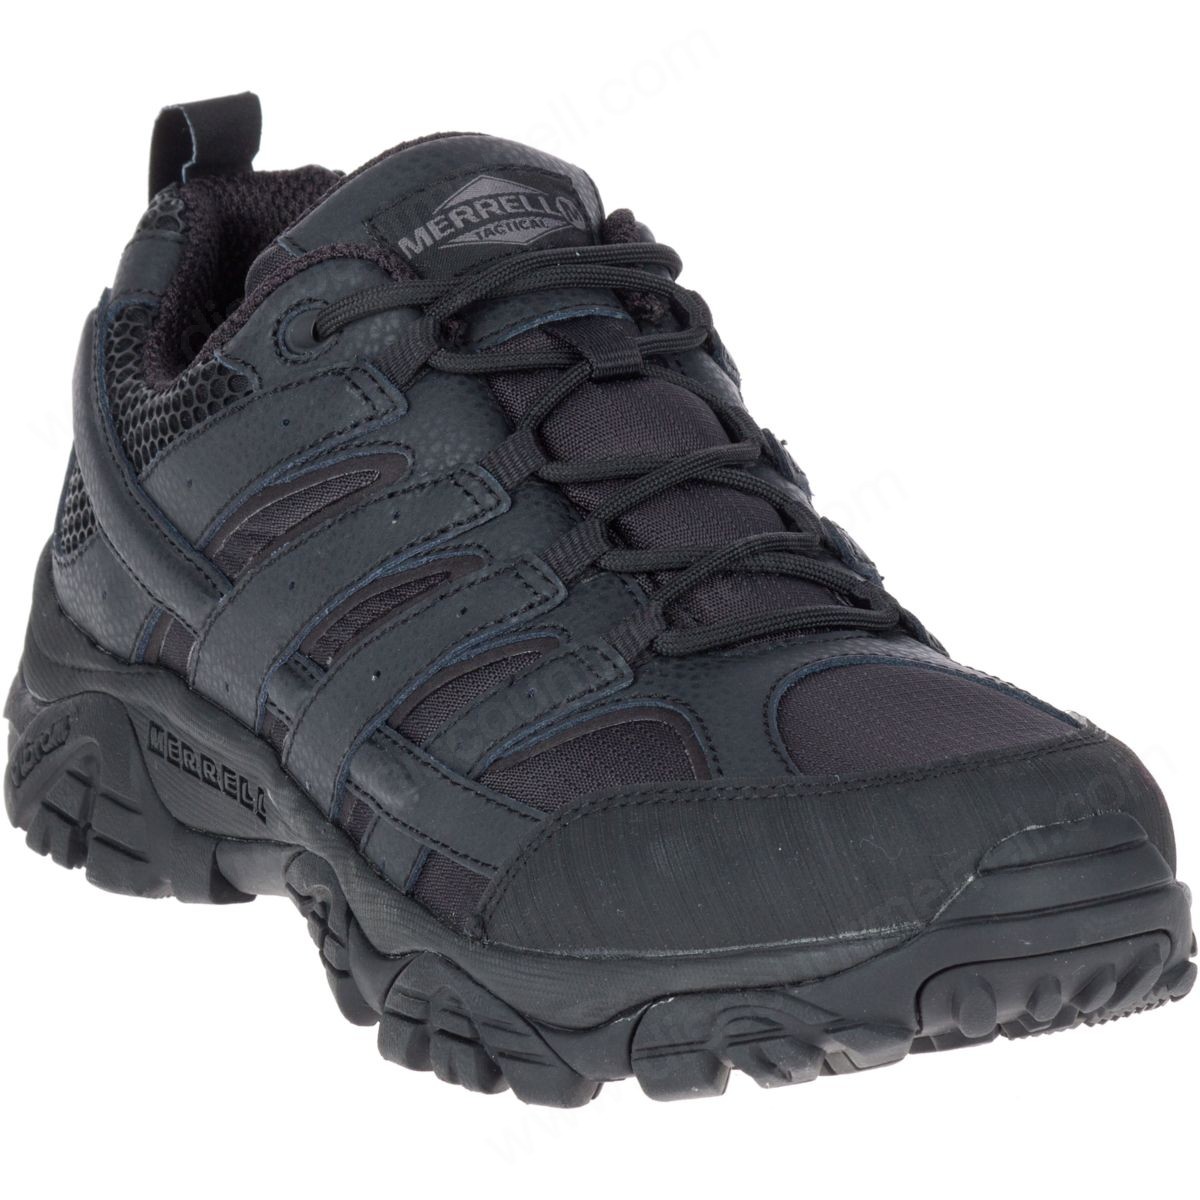 Merrell Man's Moab Tactical Shoes Wide Black - -3